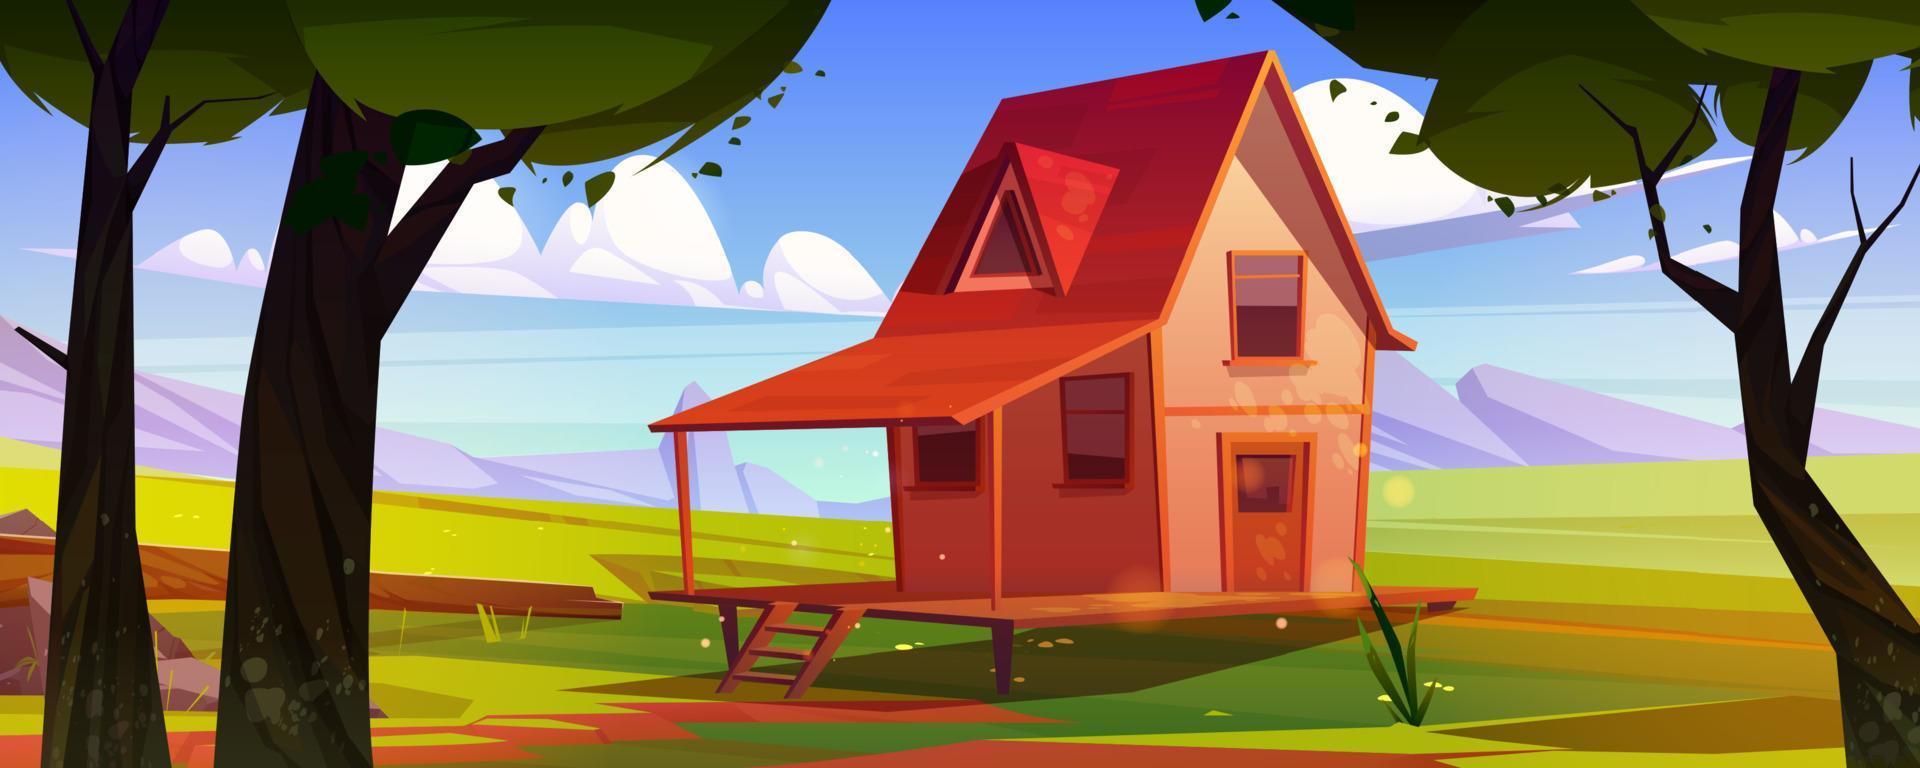 Village house in mountain valley with trees vector